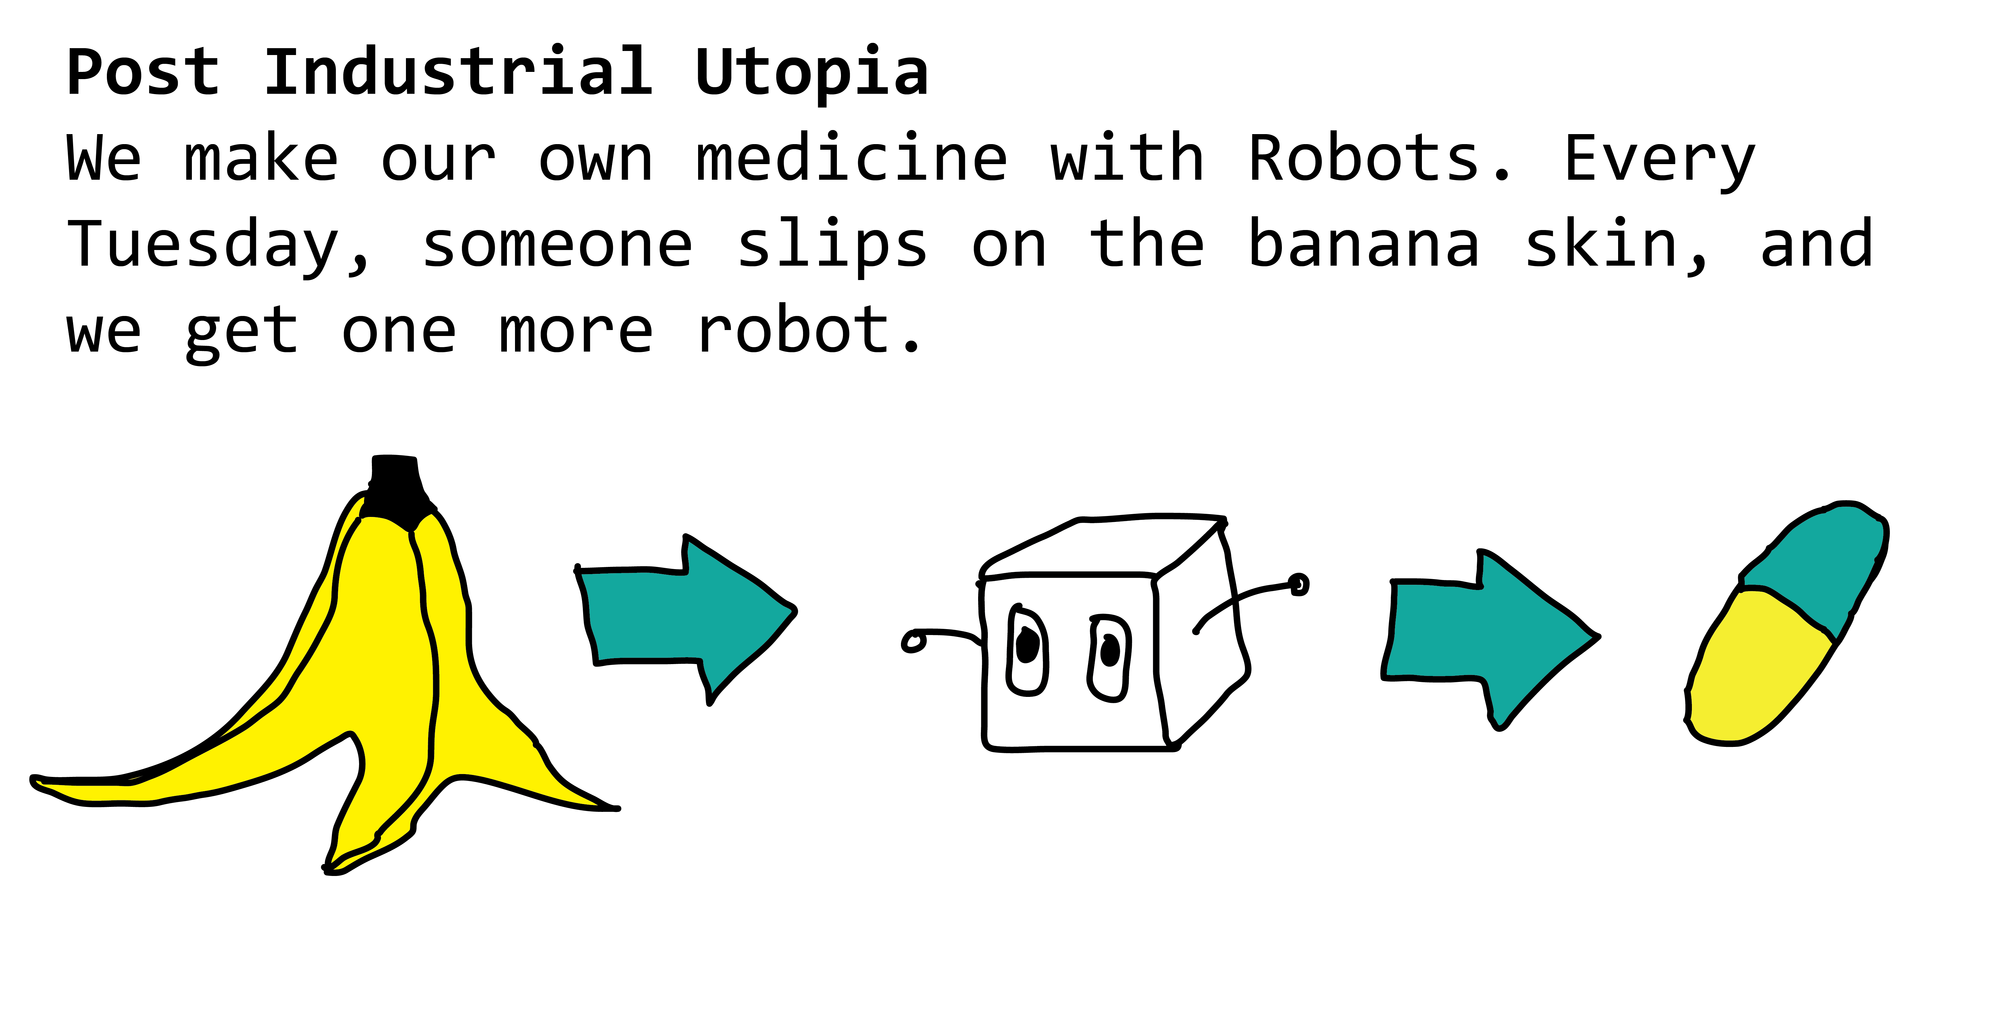 Post Industrial Utopia - We make our own medicine with Robots. Every Tuesday, someone slips on the banana skin, and we get one more robot.